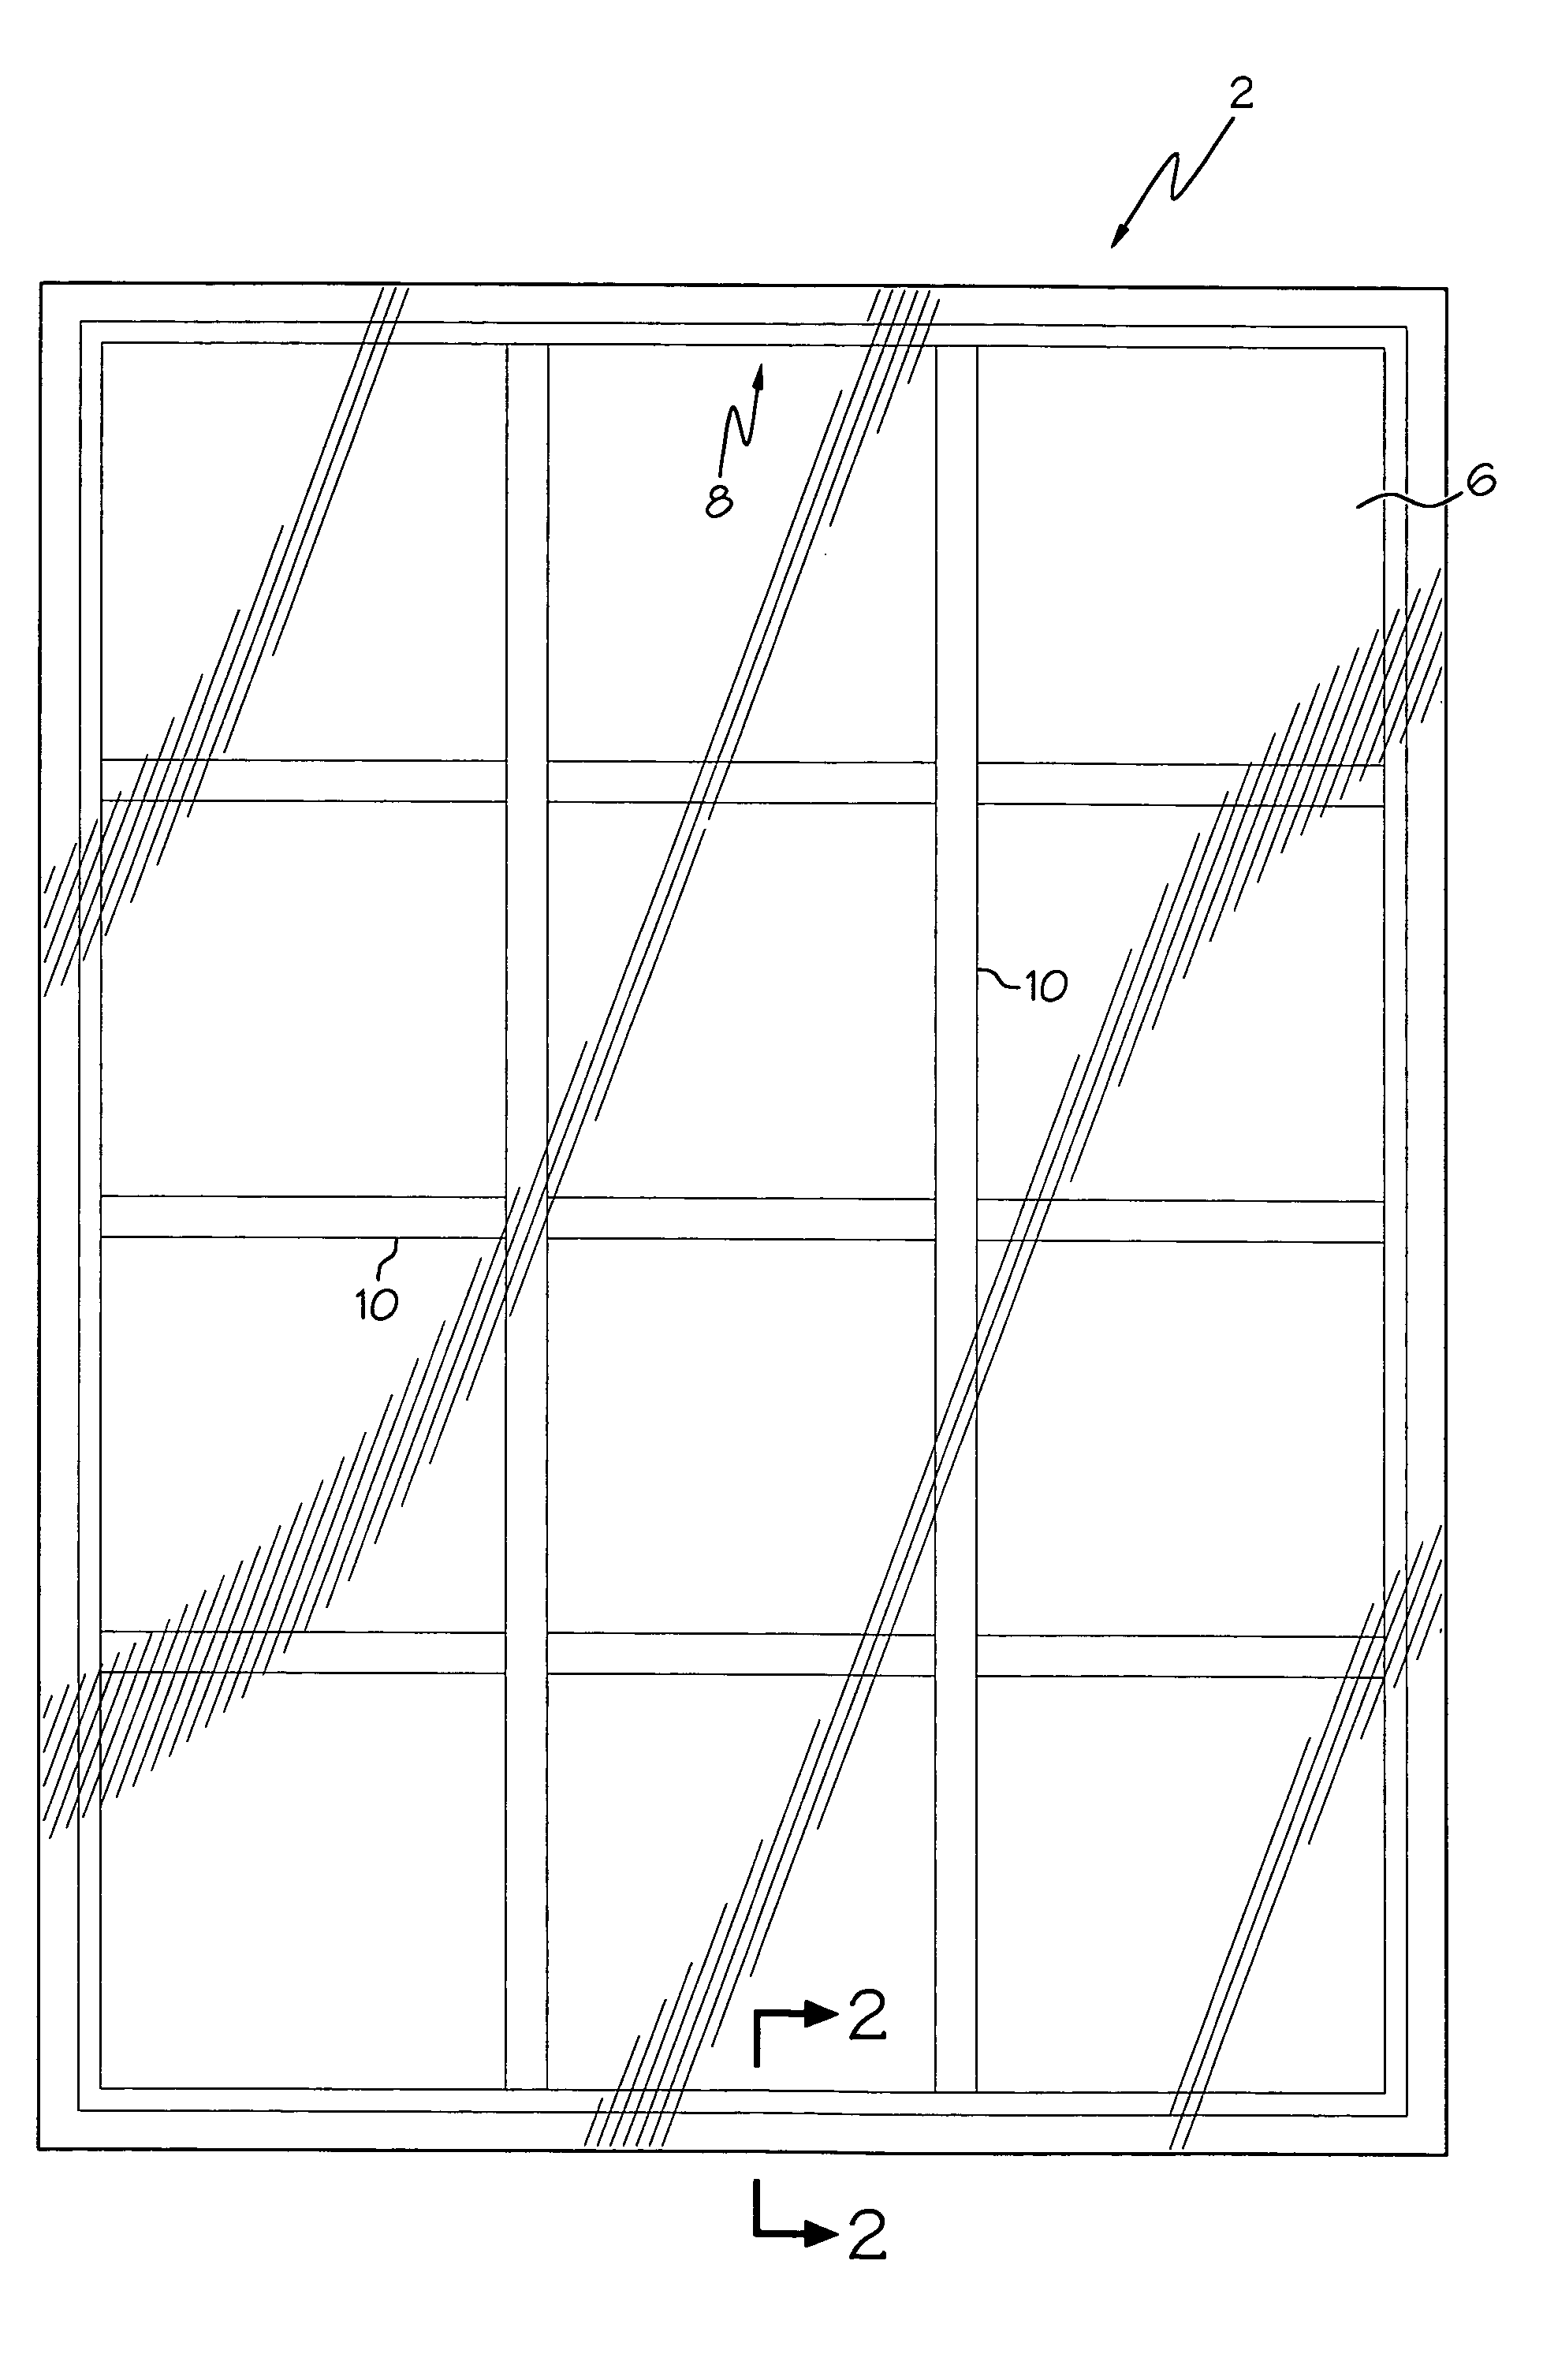 Muntin clip and method of using the same